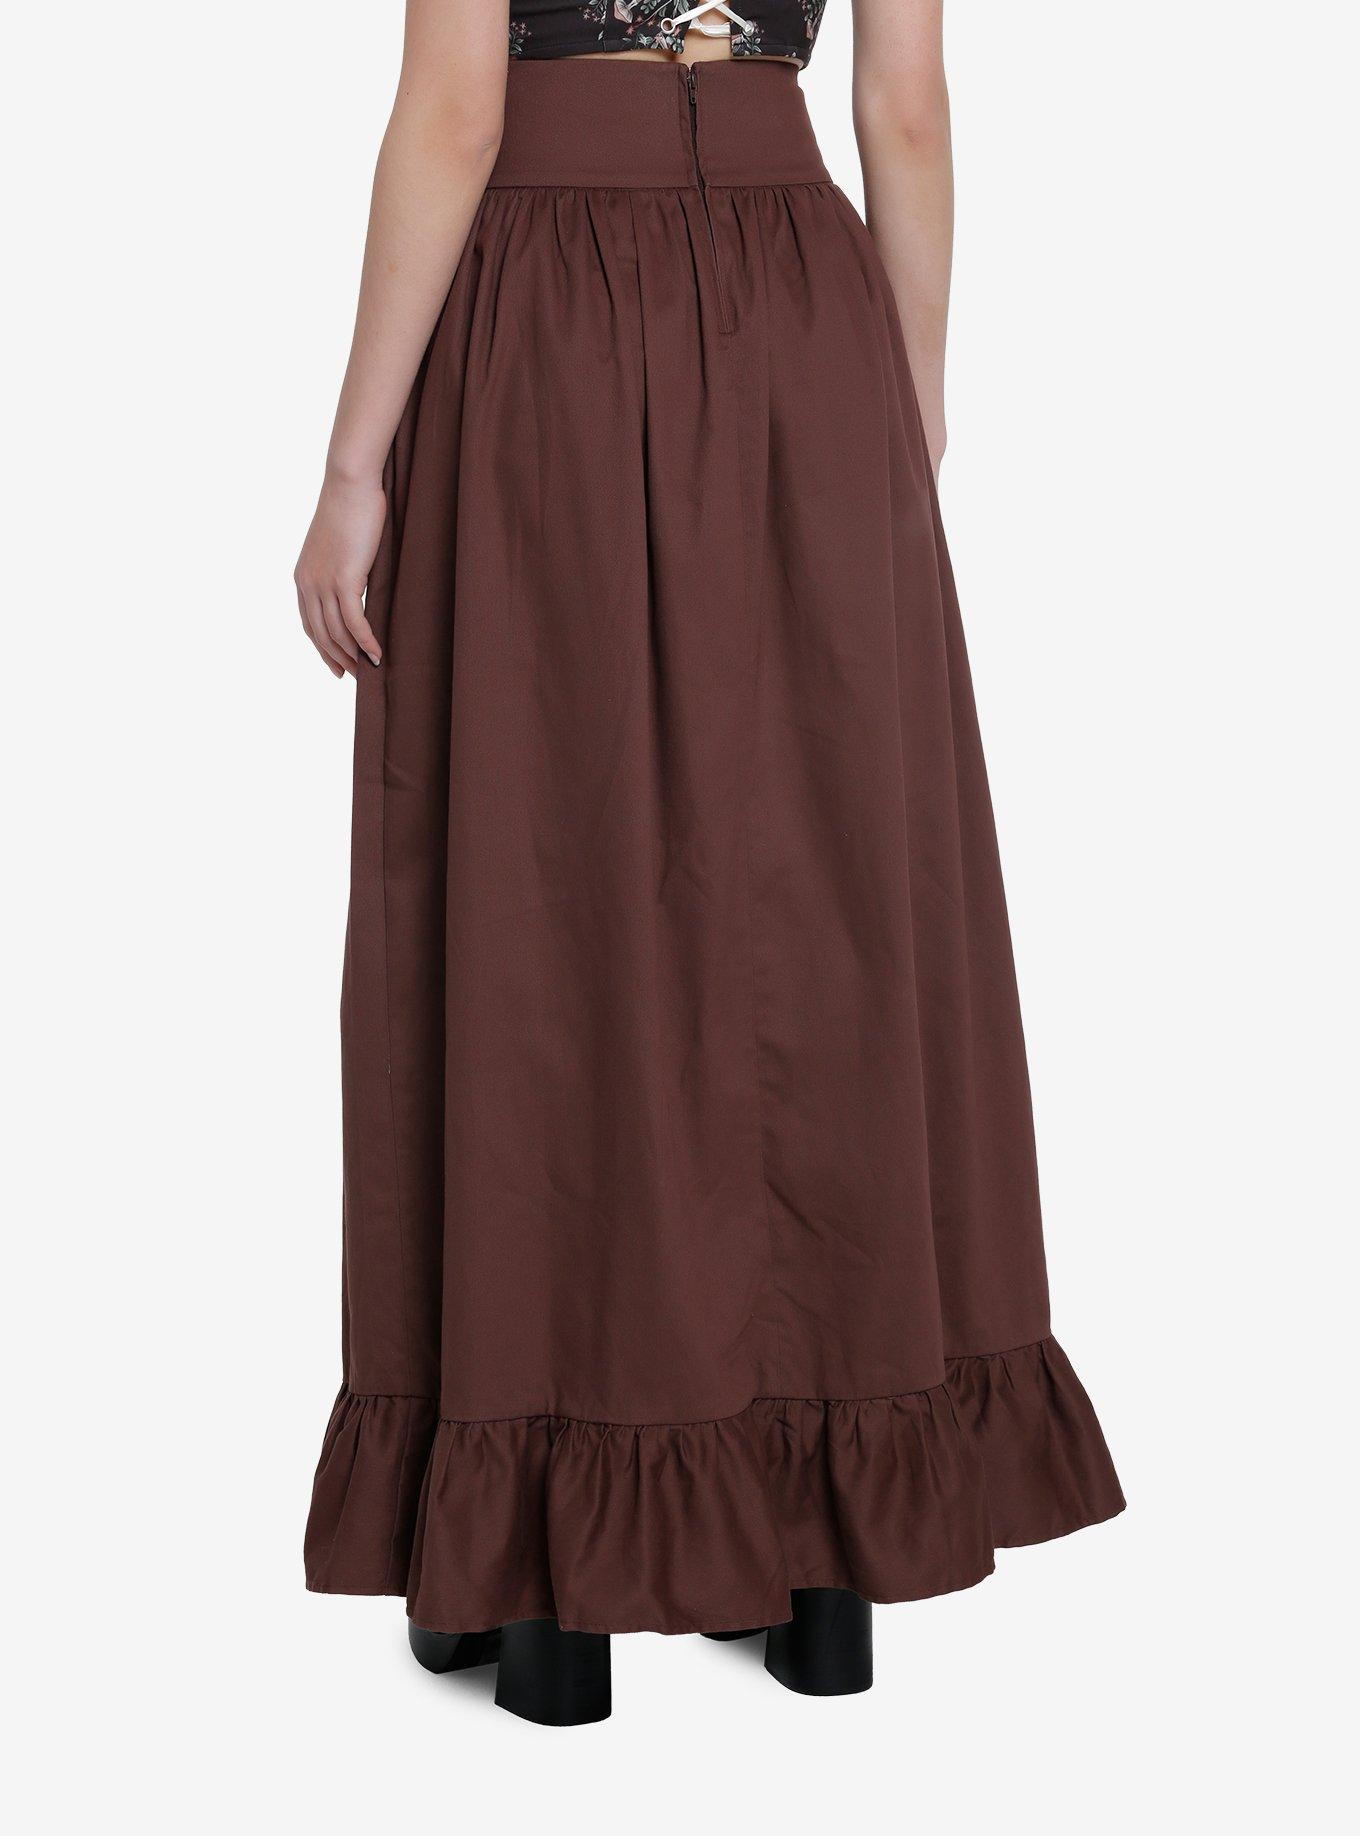 Thorn & Fable Brown Lace-Up Maxi Skirt, BROWN, alternate